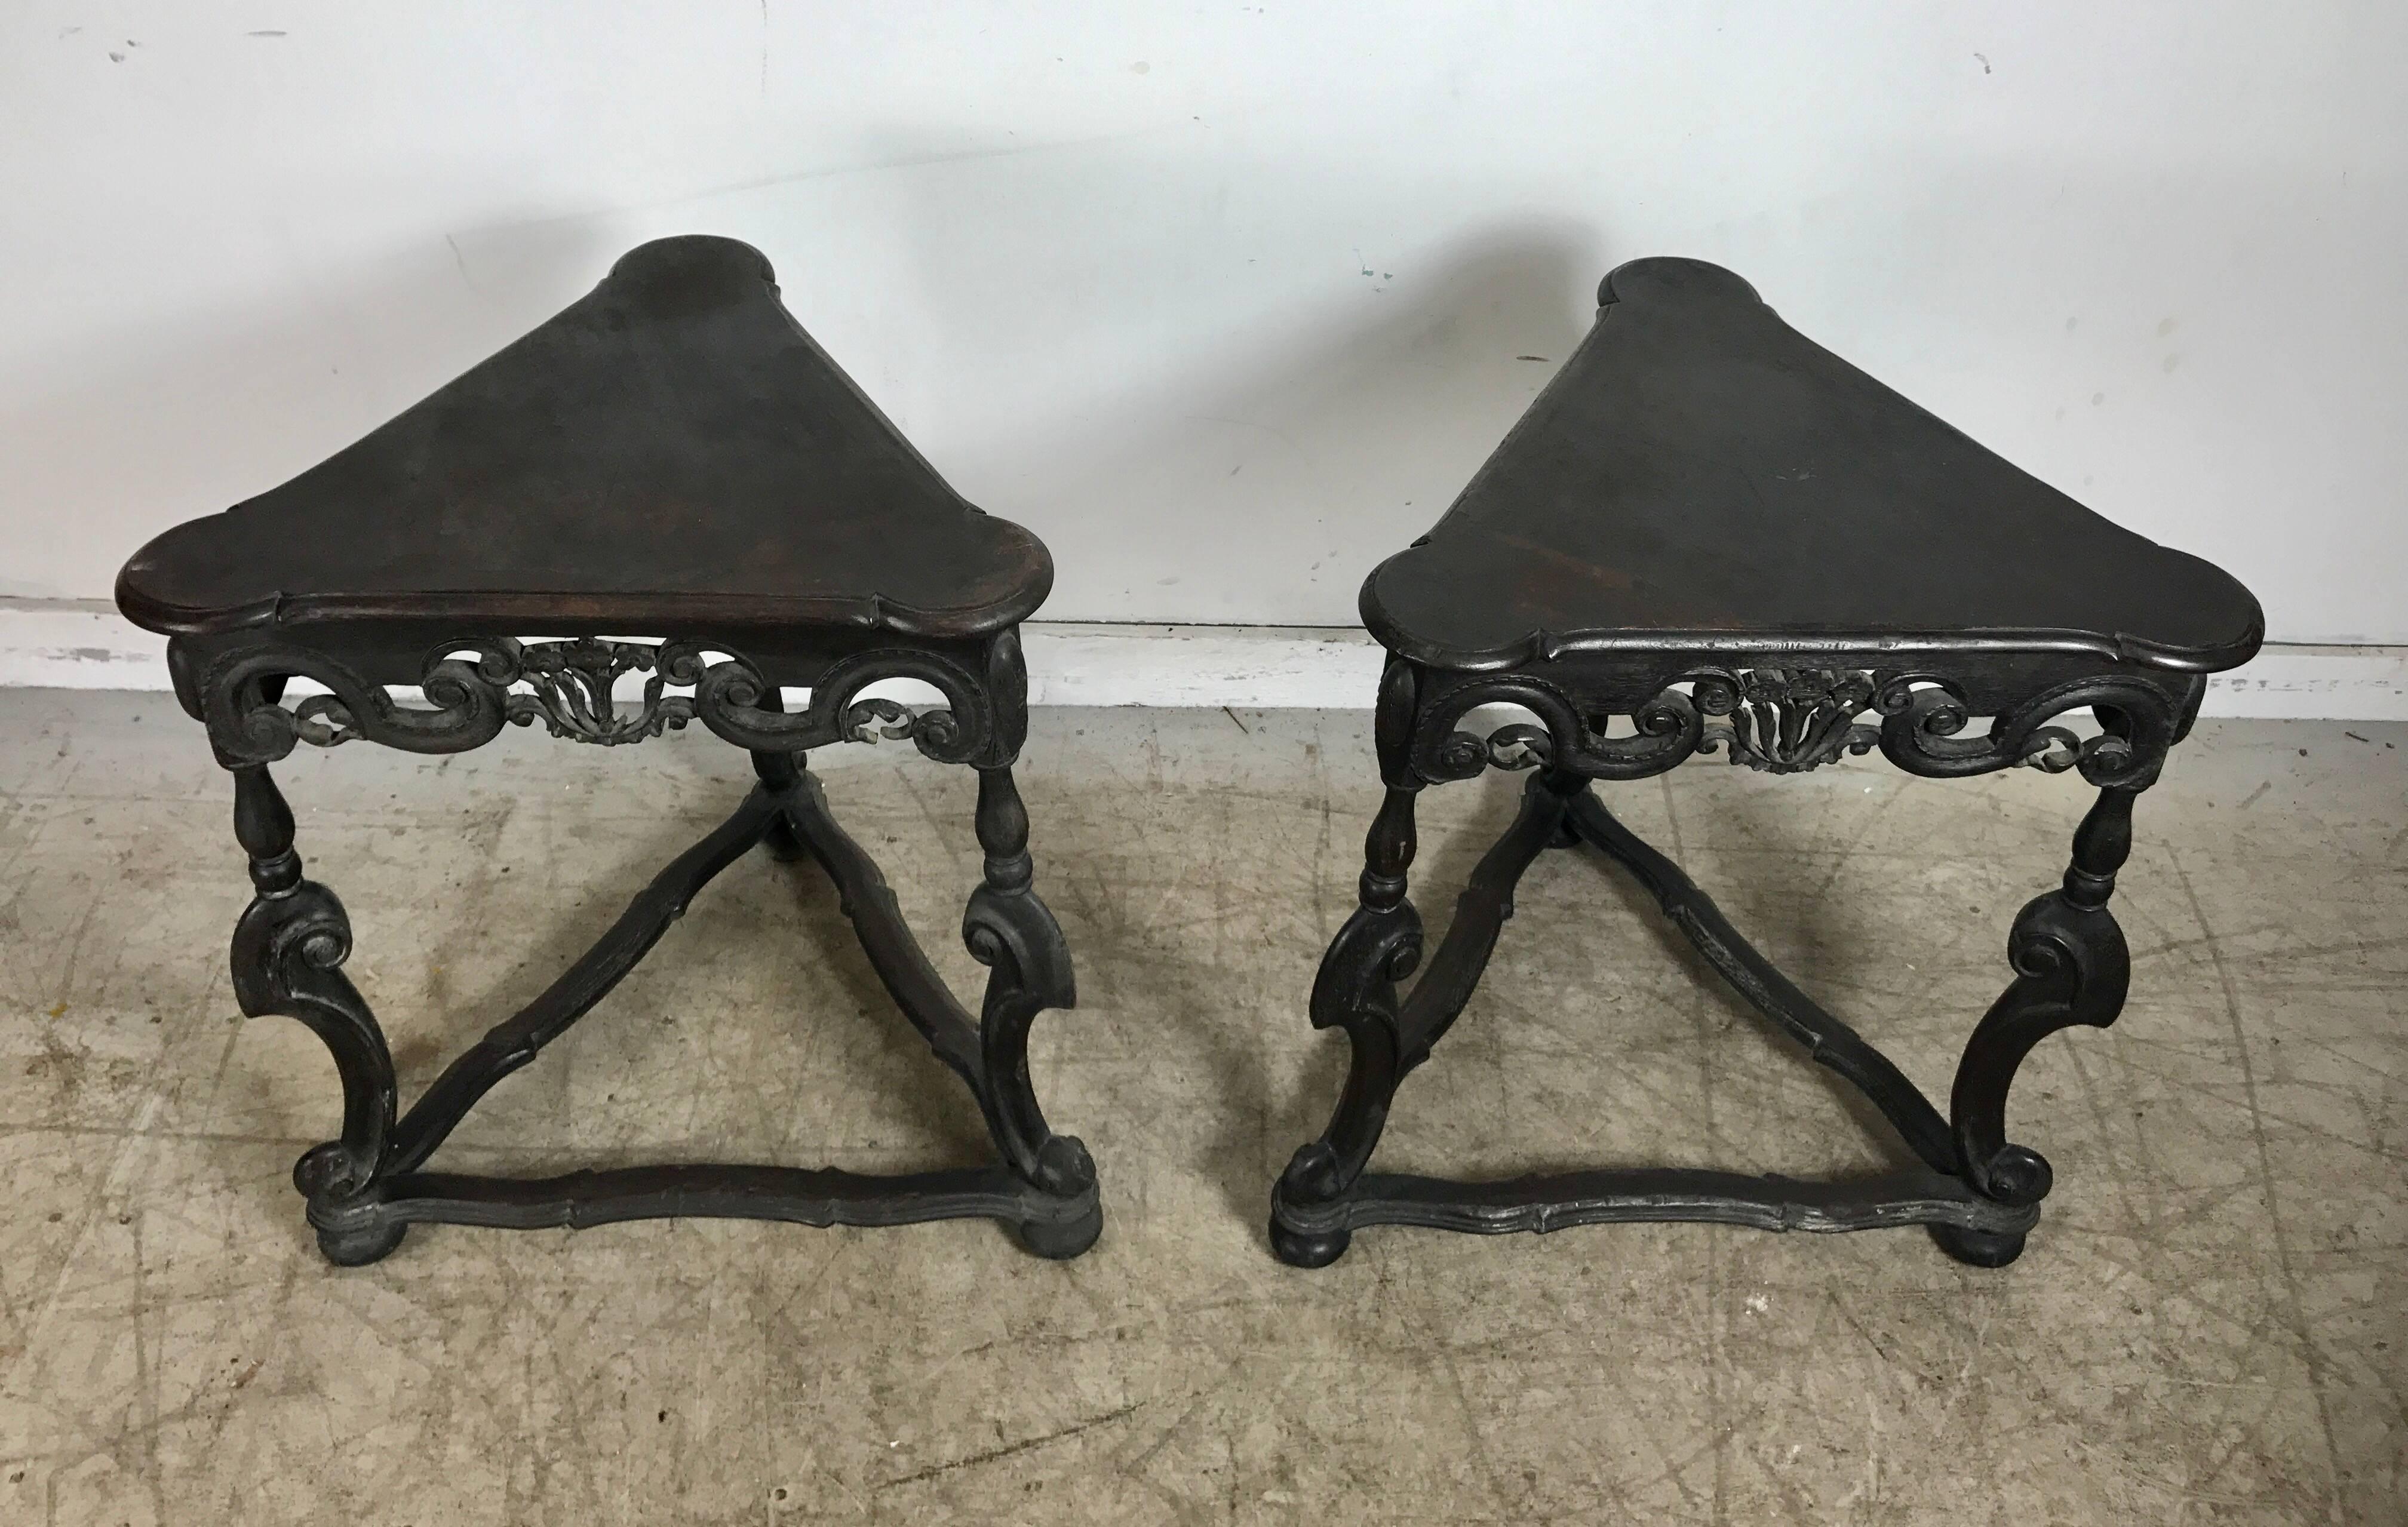 Wonderful matched pair of triangular carved walnut Rococo Revival occasional tables, Italian or Spanish in origin, circa 1920s beautiful warm original finish.